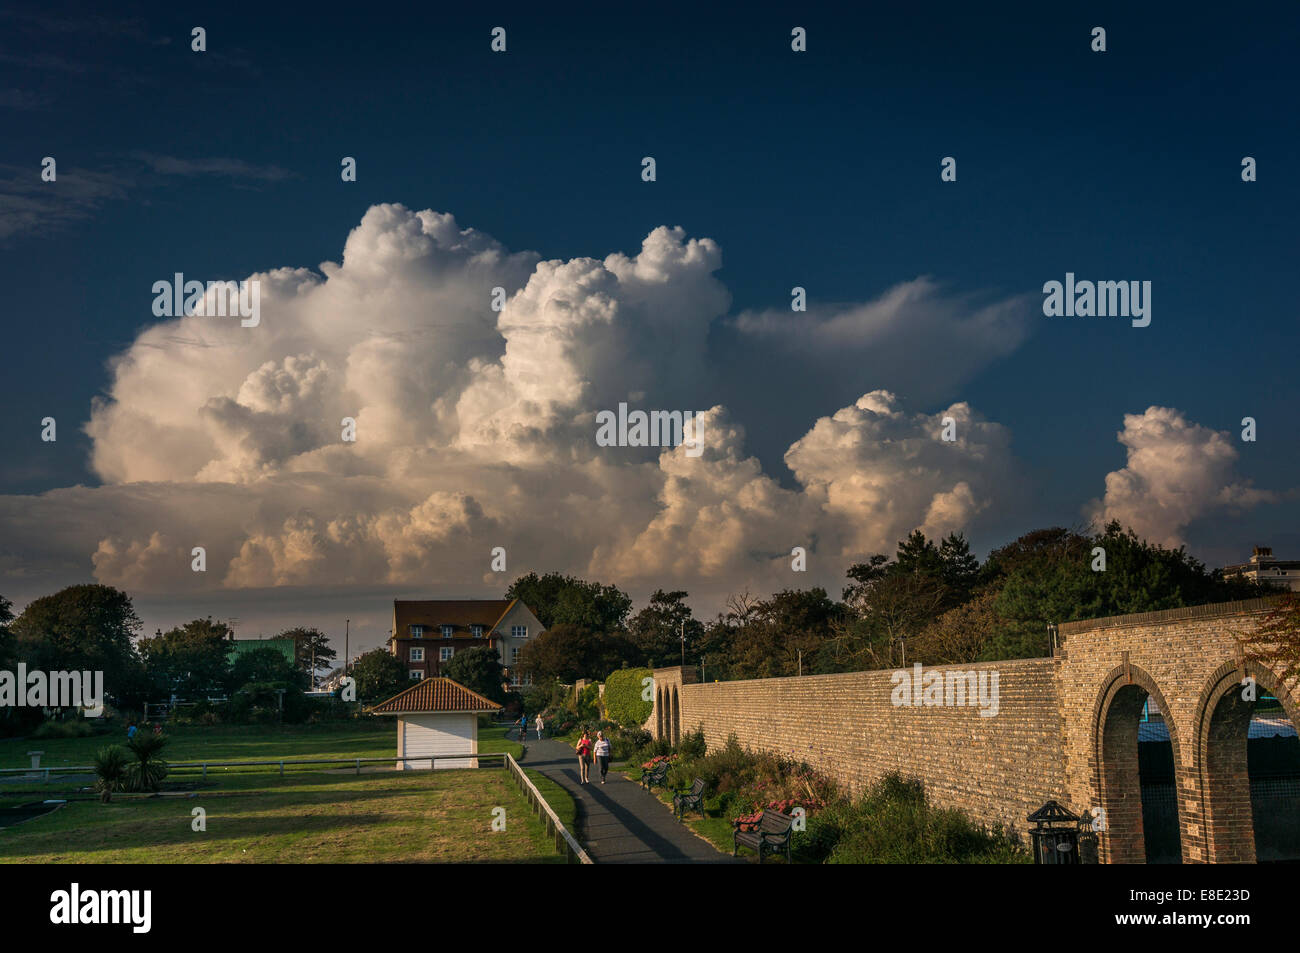 Dramatic evening clouds over Denton Gardens, Worthing, West Sussex, UK Stock Photo